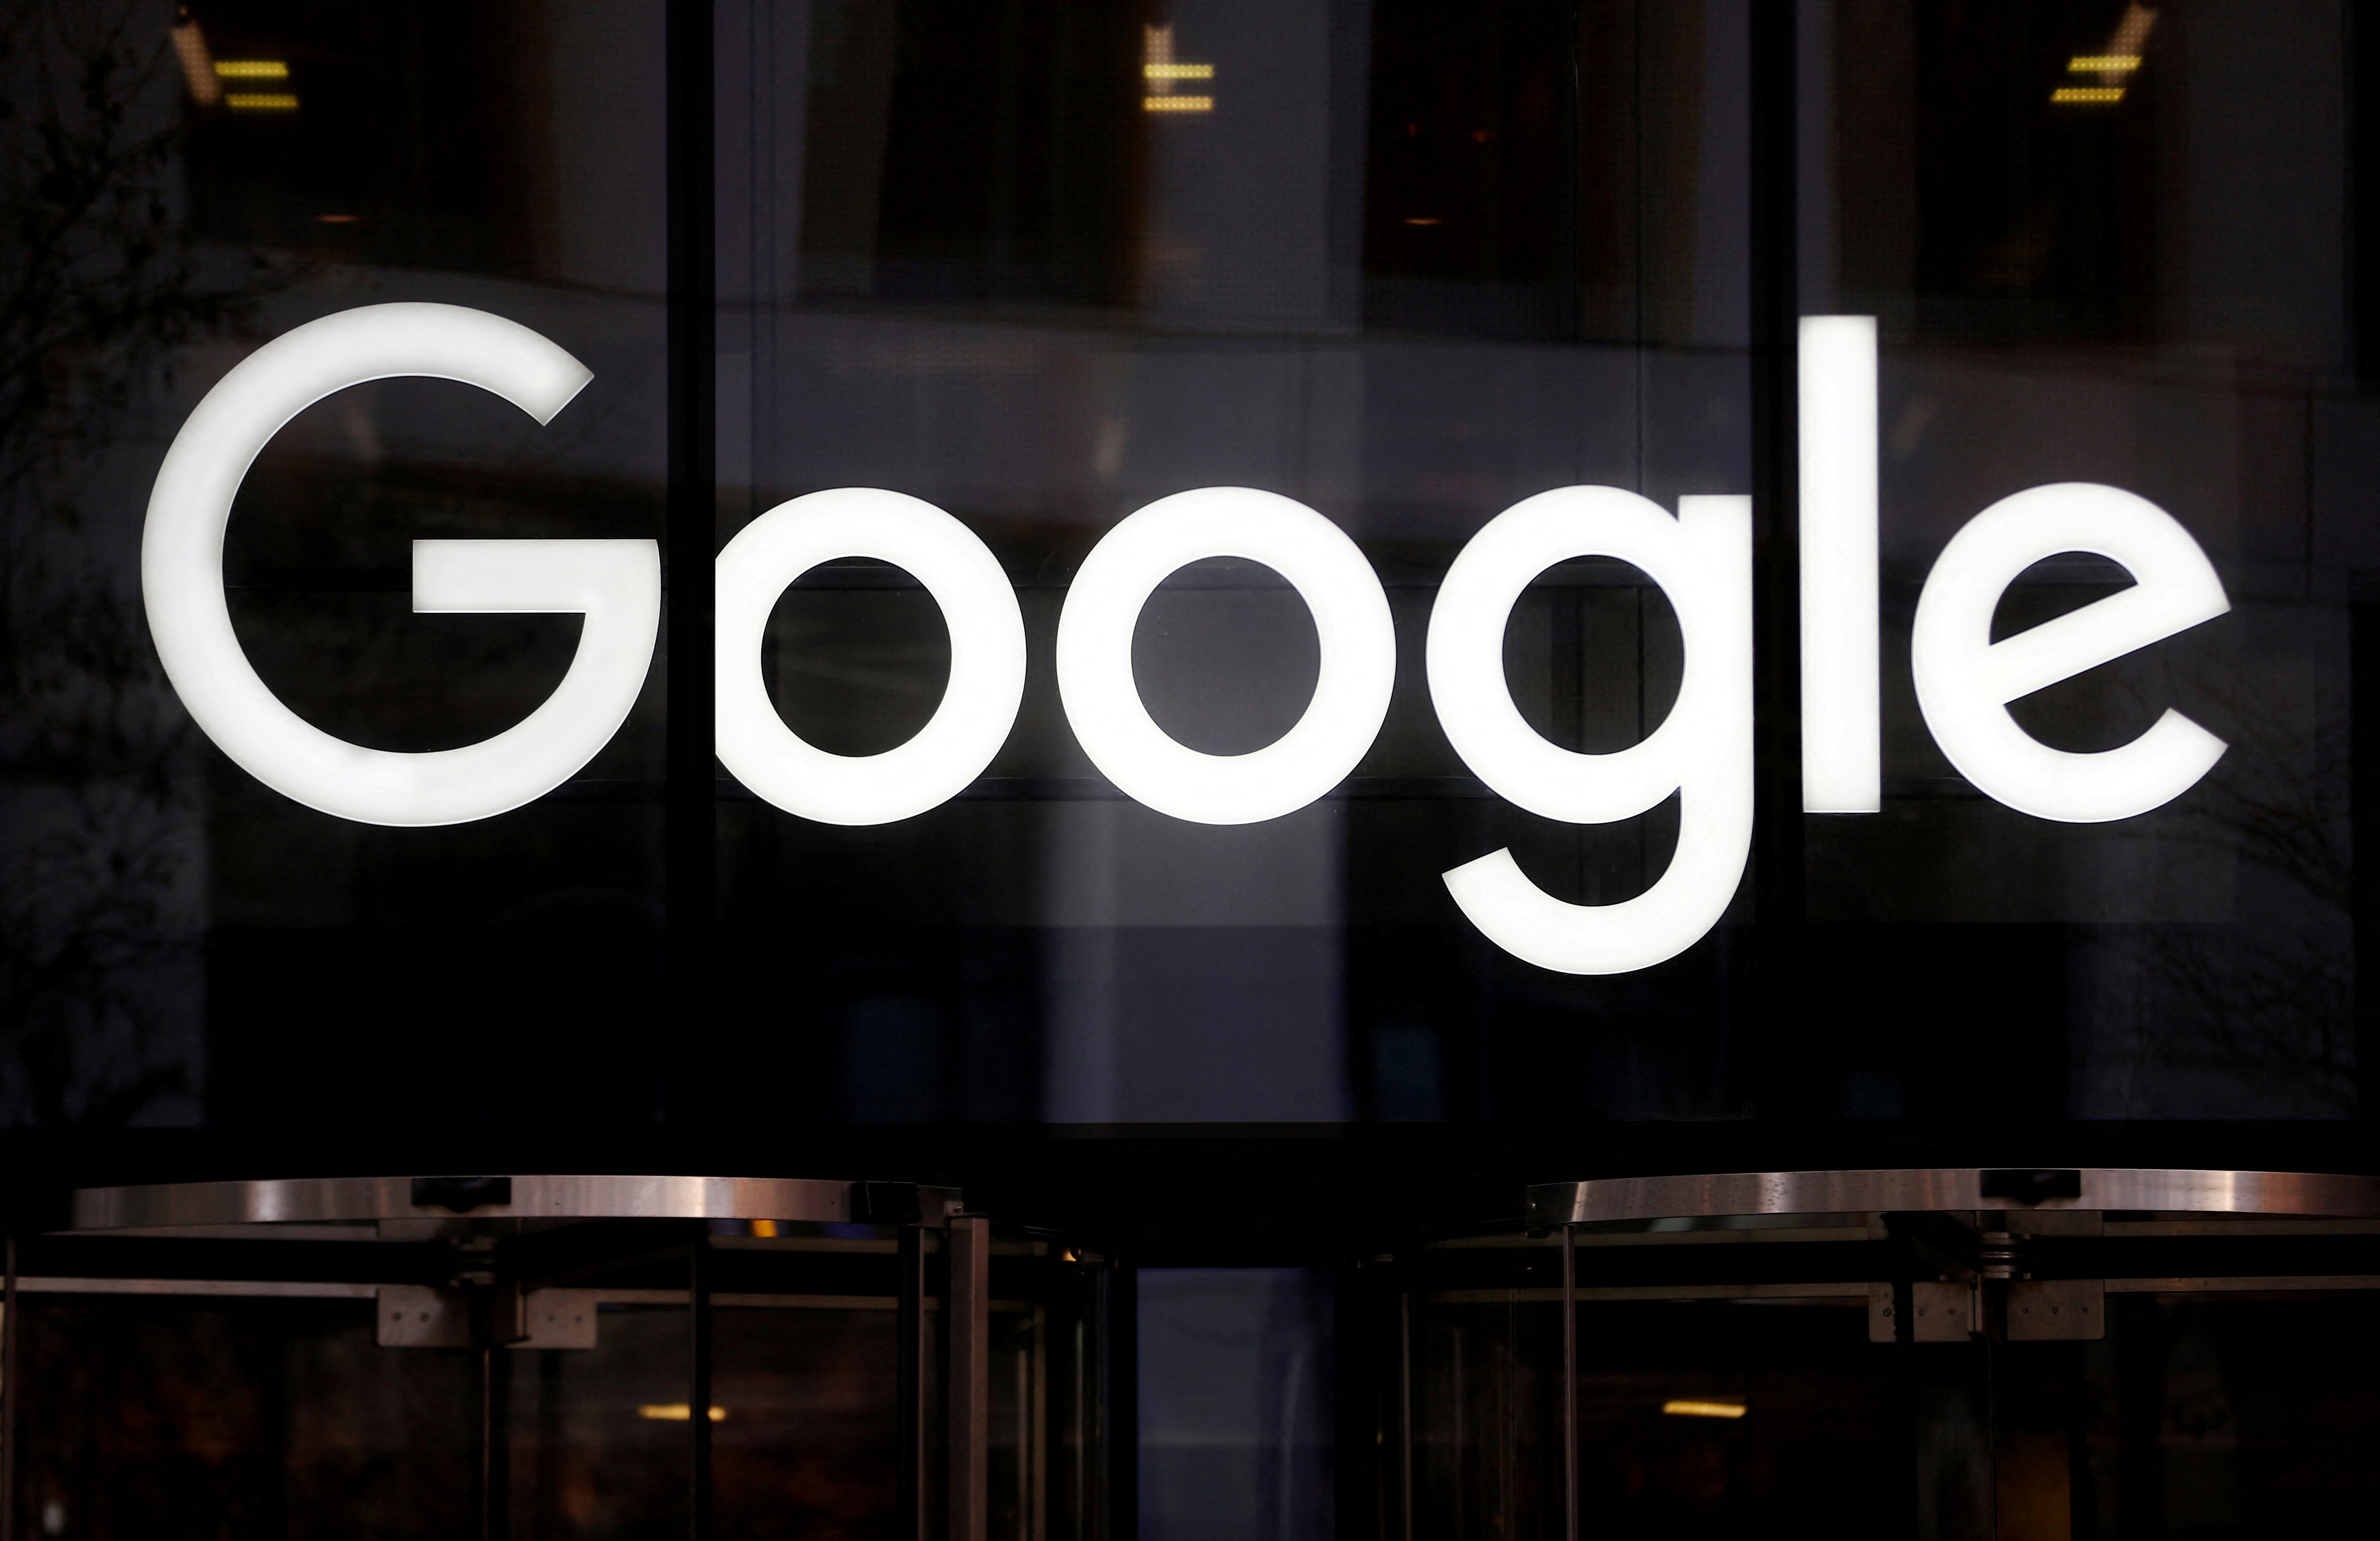 Google must remove “manifestly inaccurate” data, says the EU’s highest court